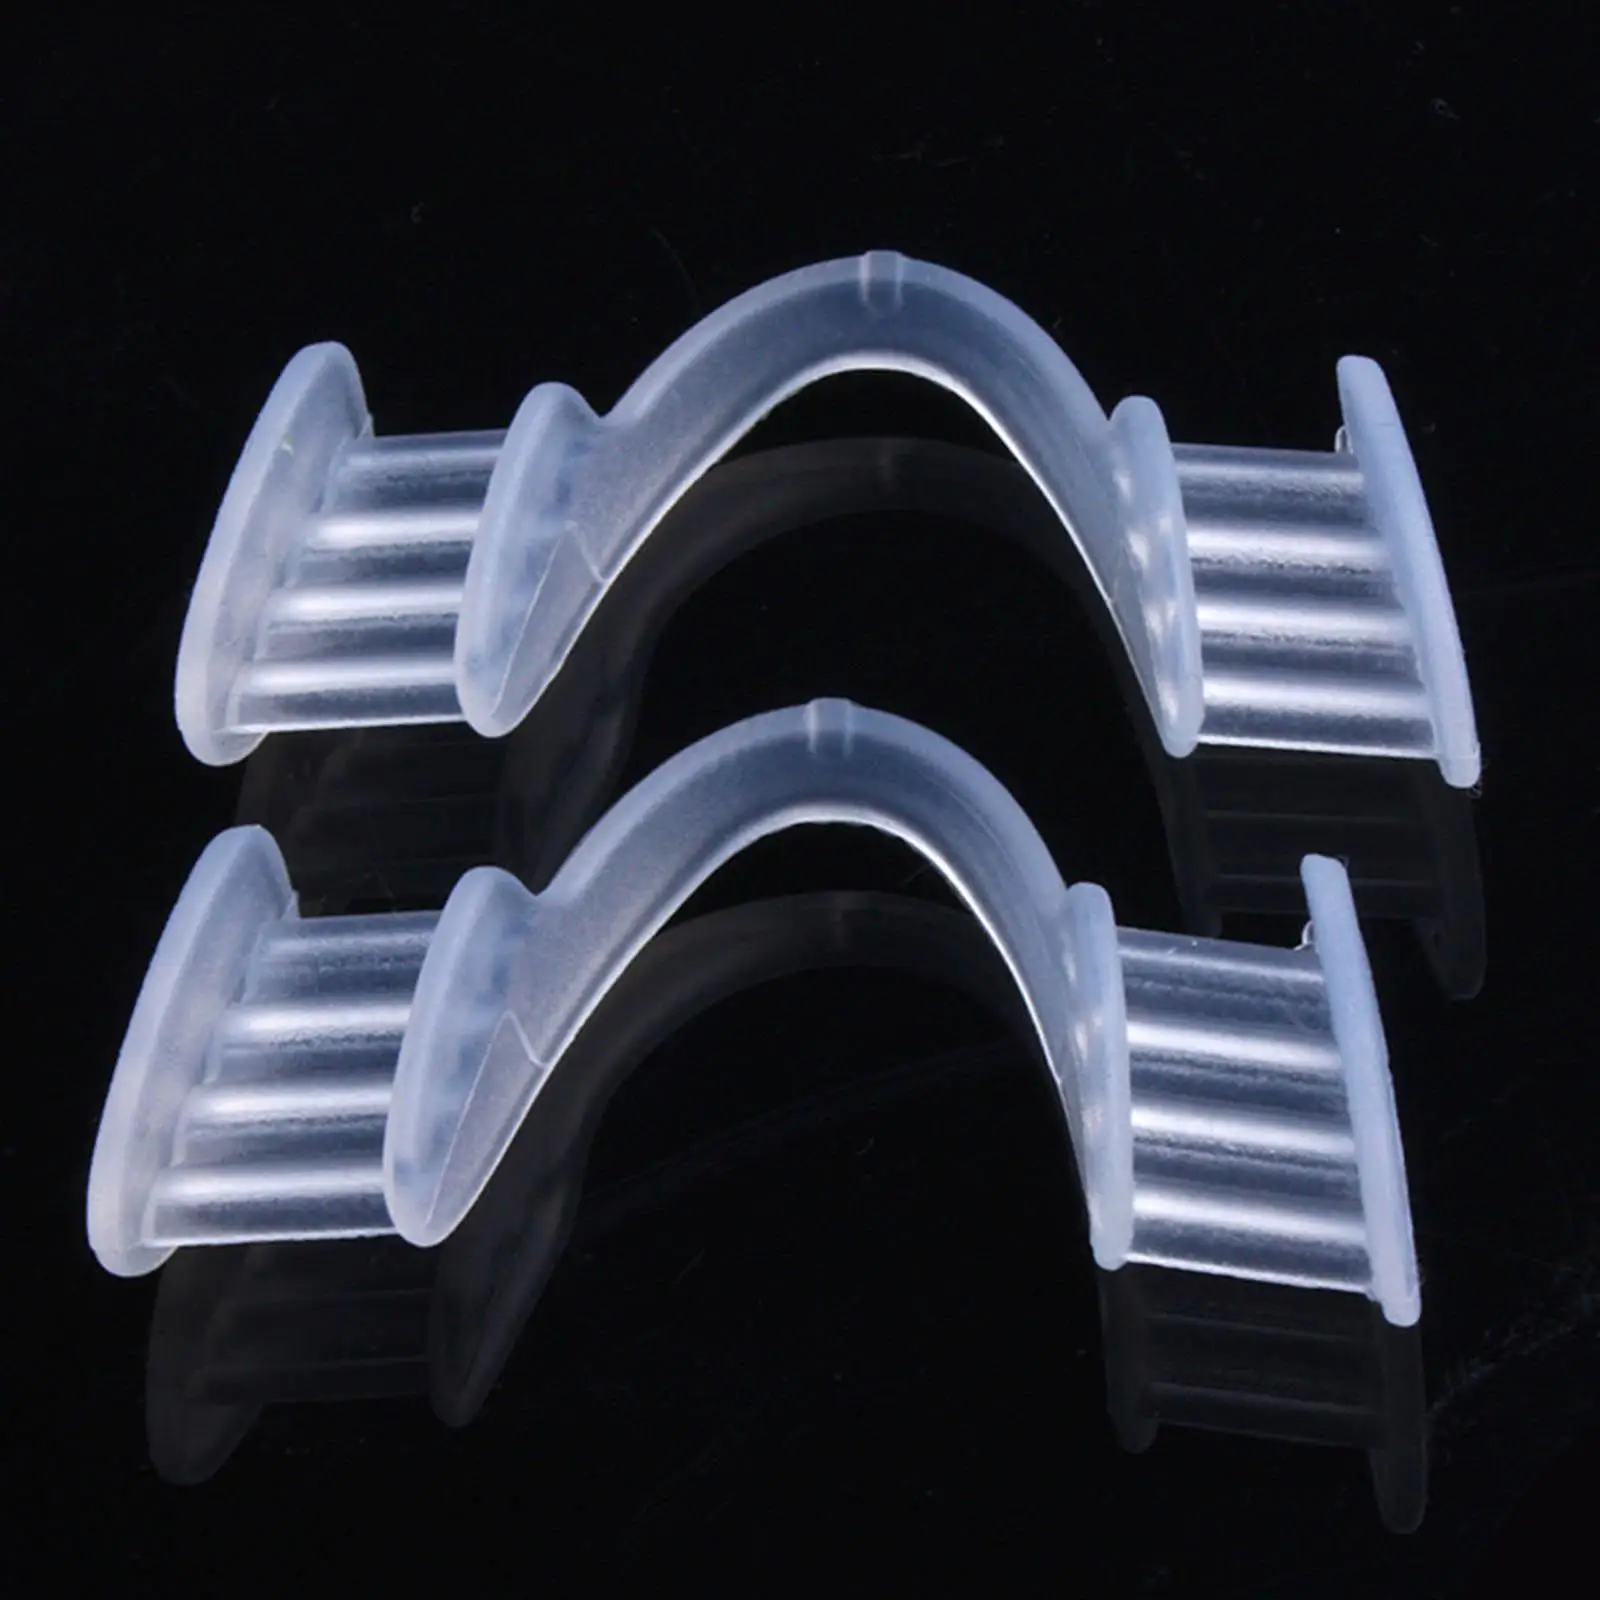 2x Silicone Night Mouth Guard Prevent Clenching Comfortable for Night Sleep Tooth Protector Tooth Guard for Teeth Grind